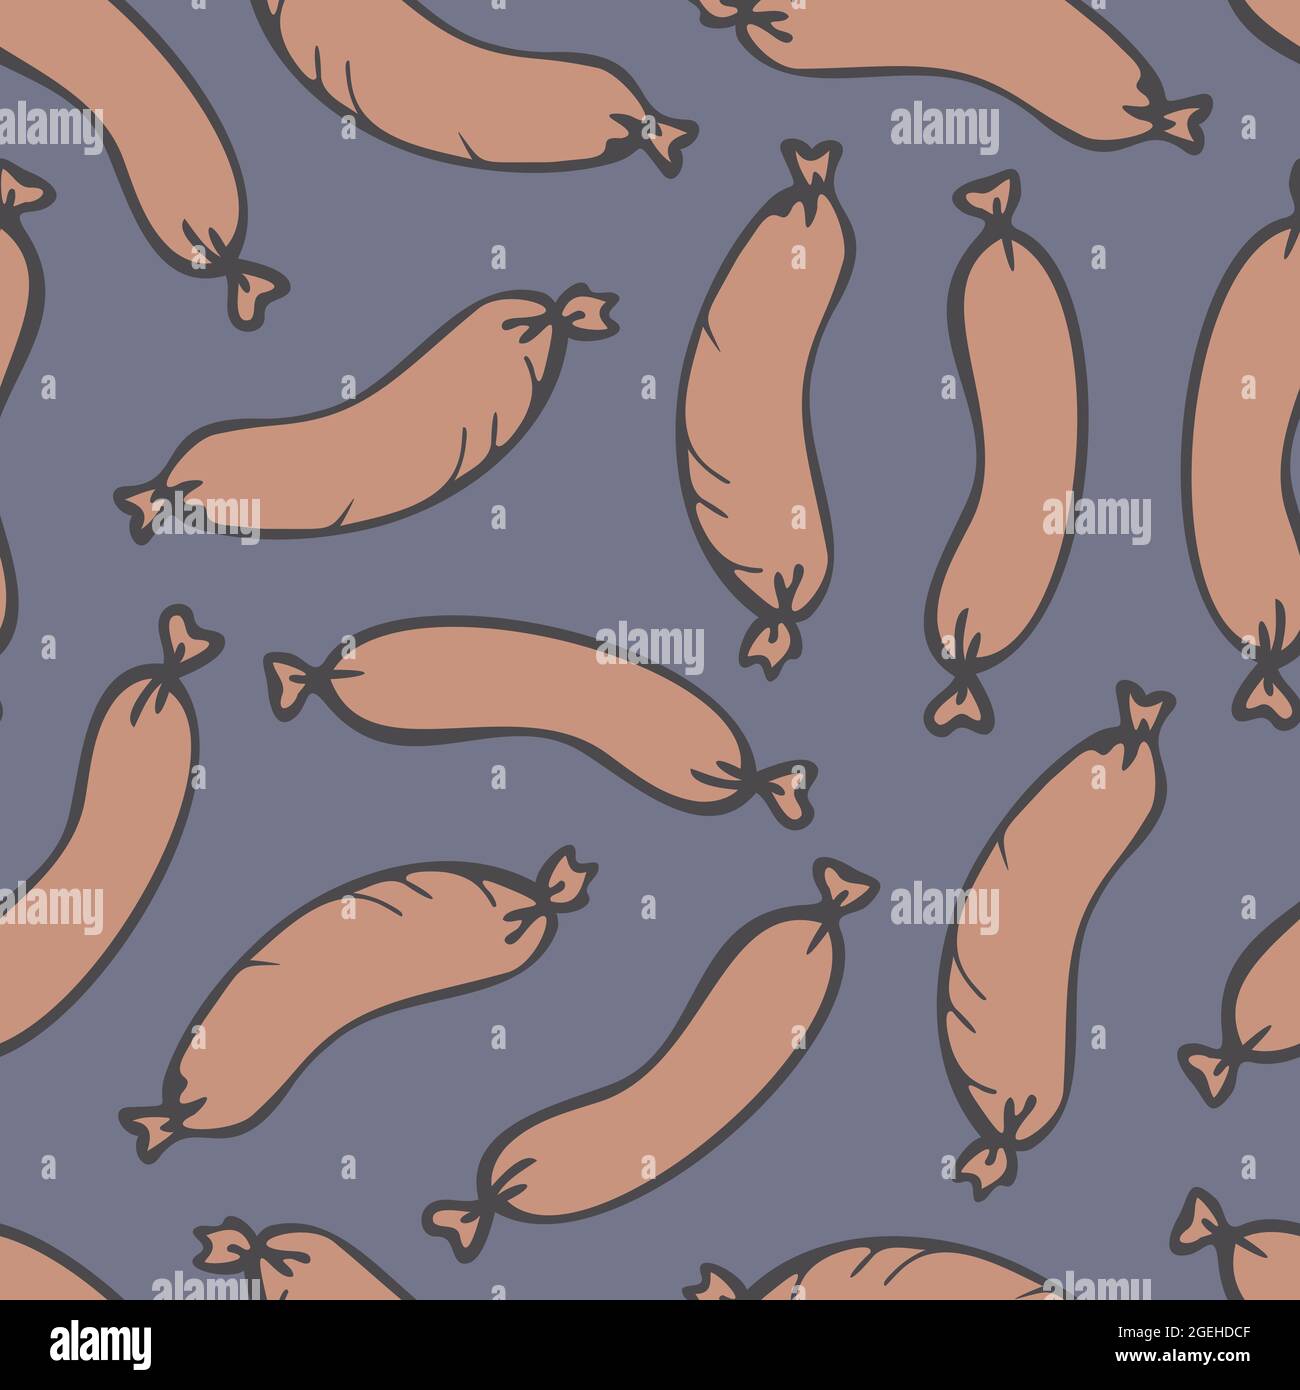 Vector seamless pattern with sausages. Design in cartoon style. Stock Vector